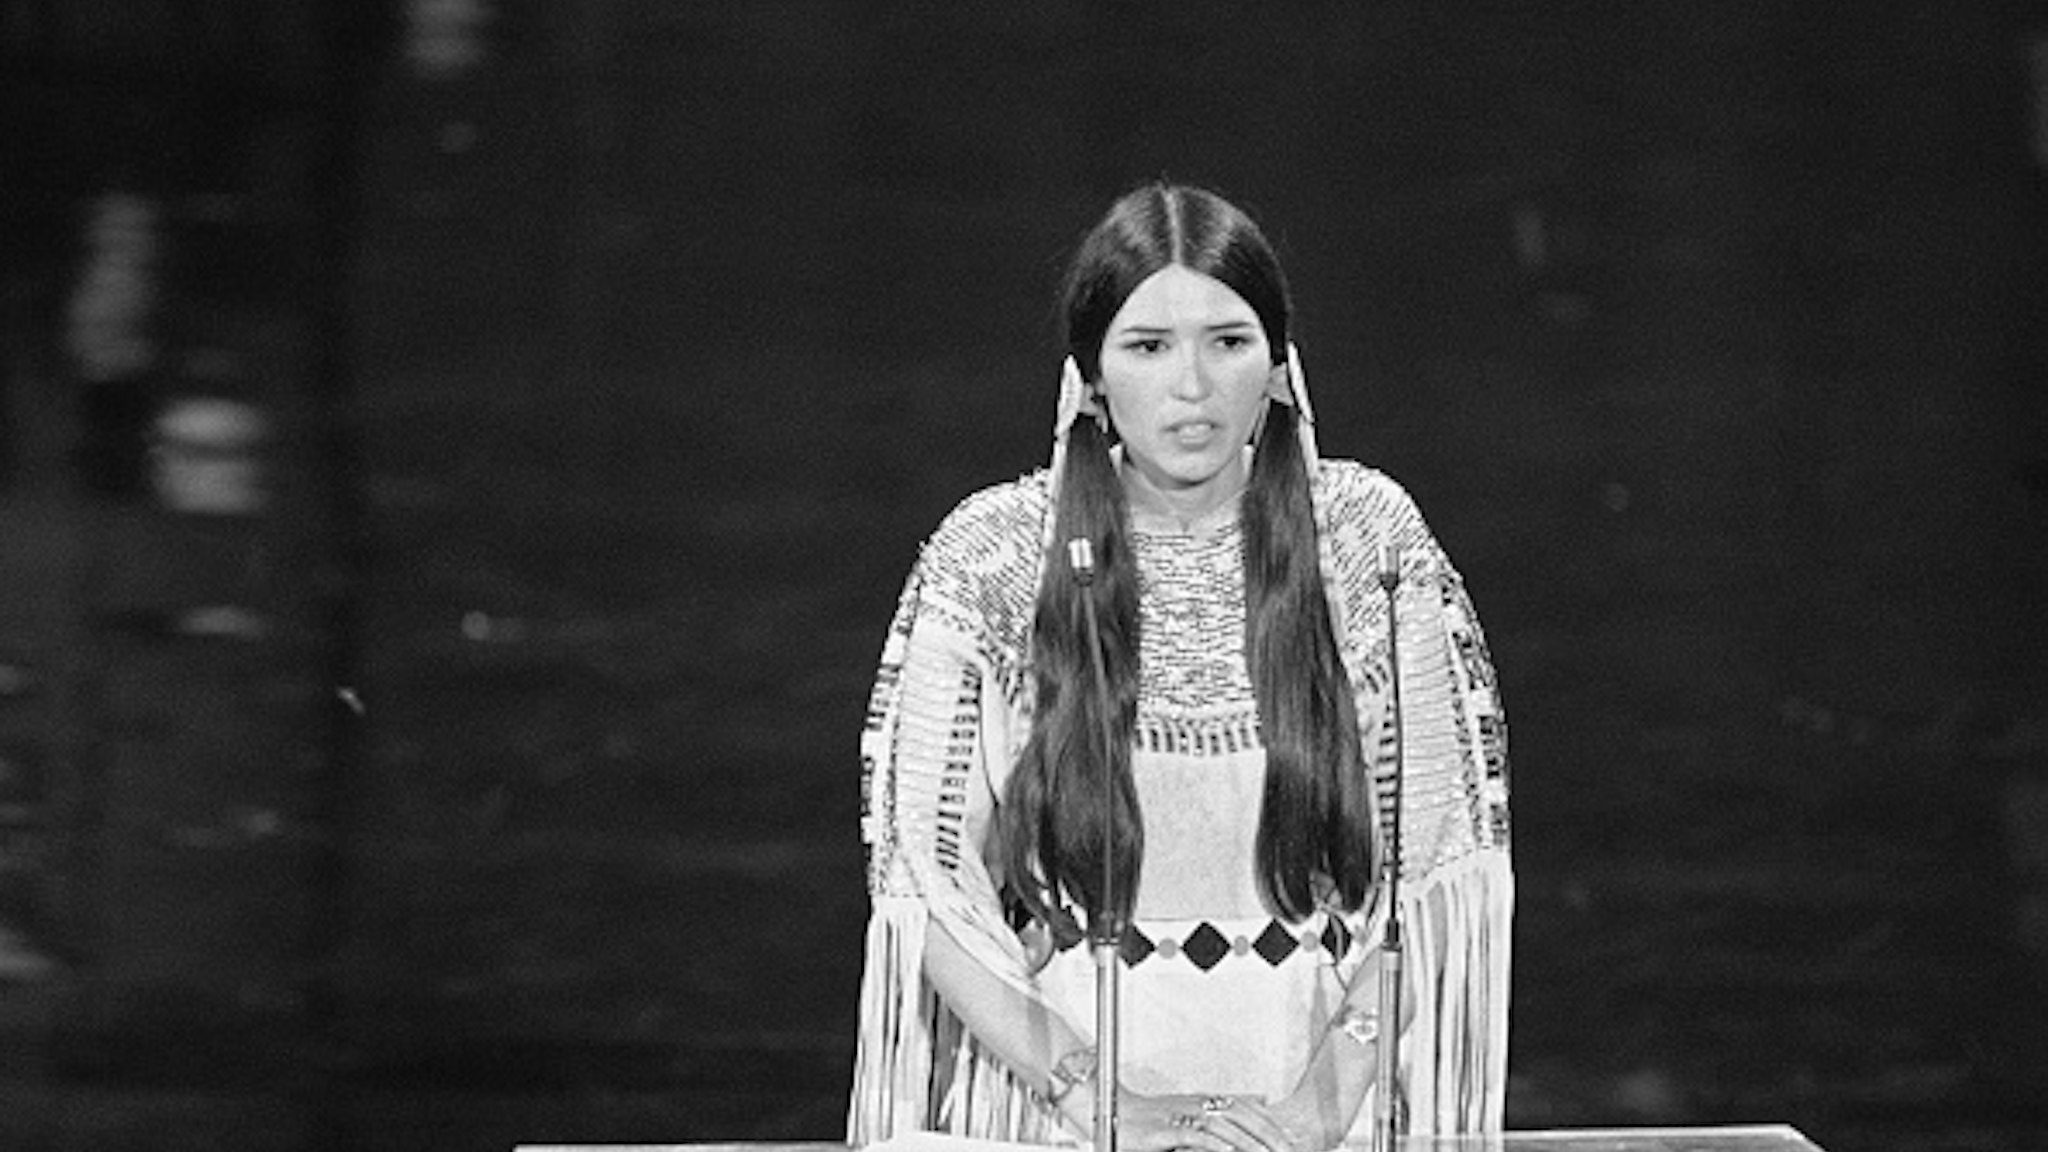 Native American Sacheen Littlefeather speaks at the 45th Academy Awards. On behalf of Marlon Brando, she refused the Best Actor award he was awarded for his role in Godfather. Brando refused the award because of the treatment by the Americans of the American Indian.